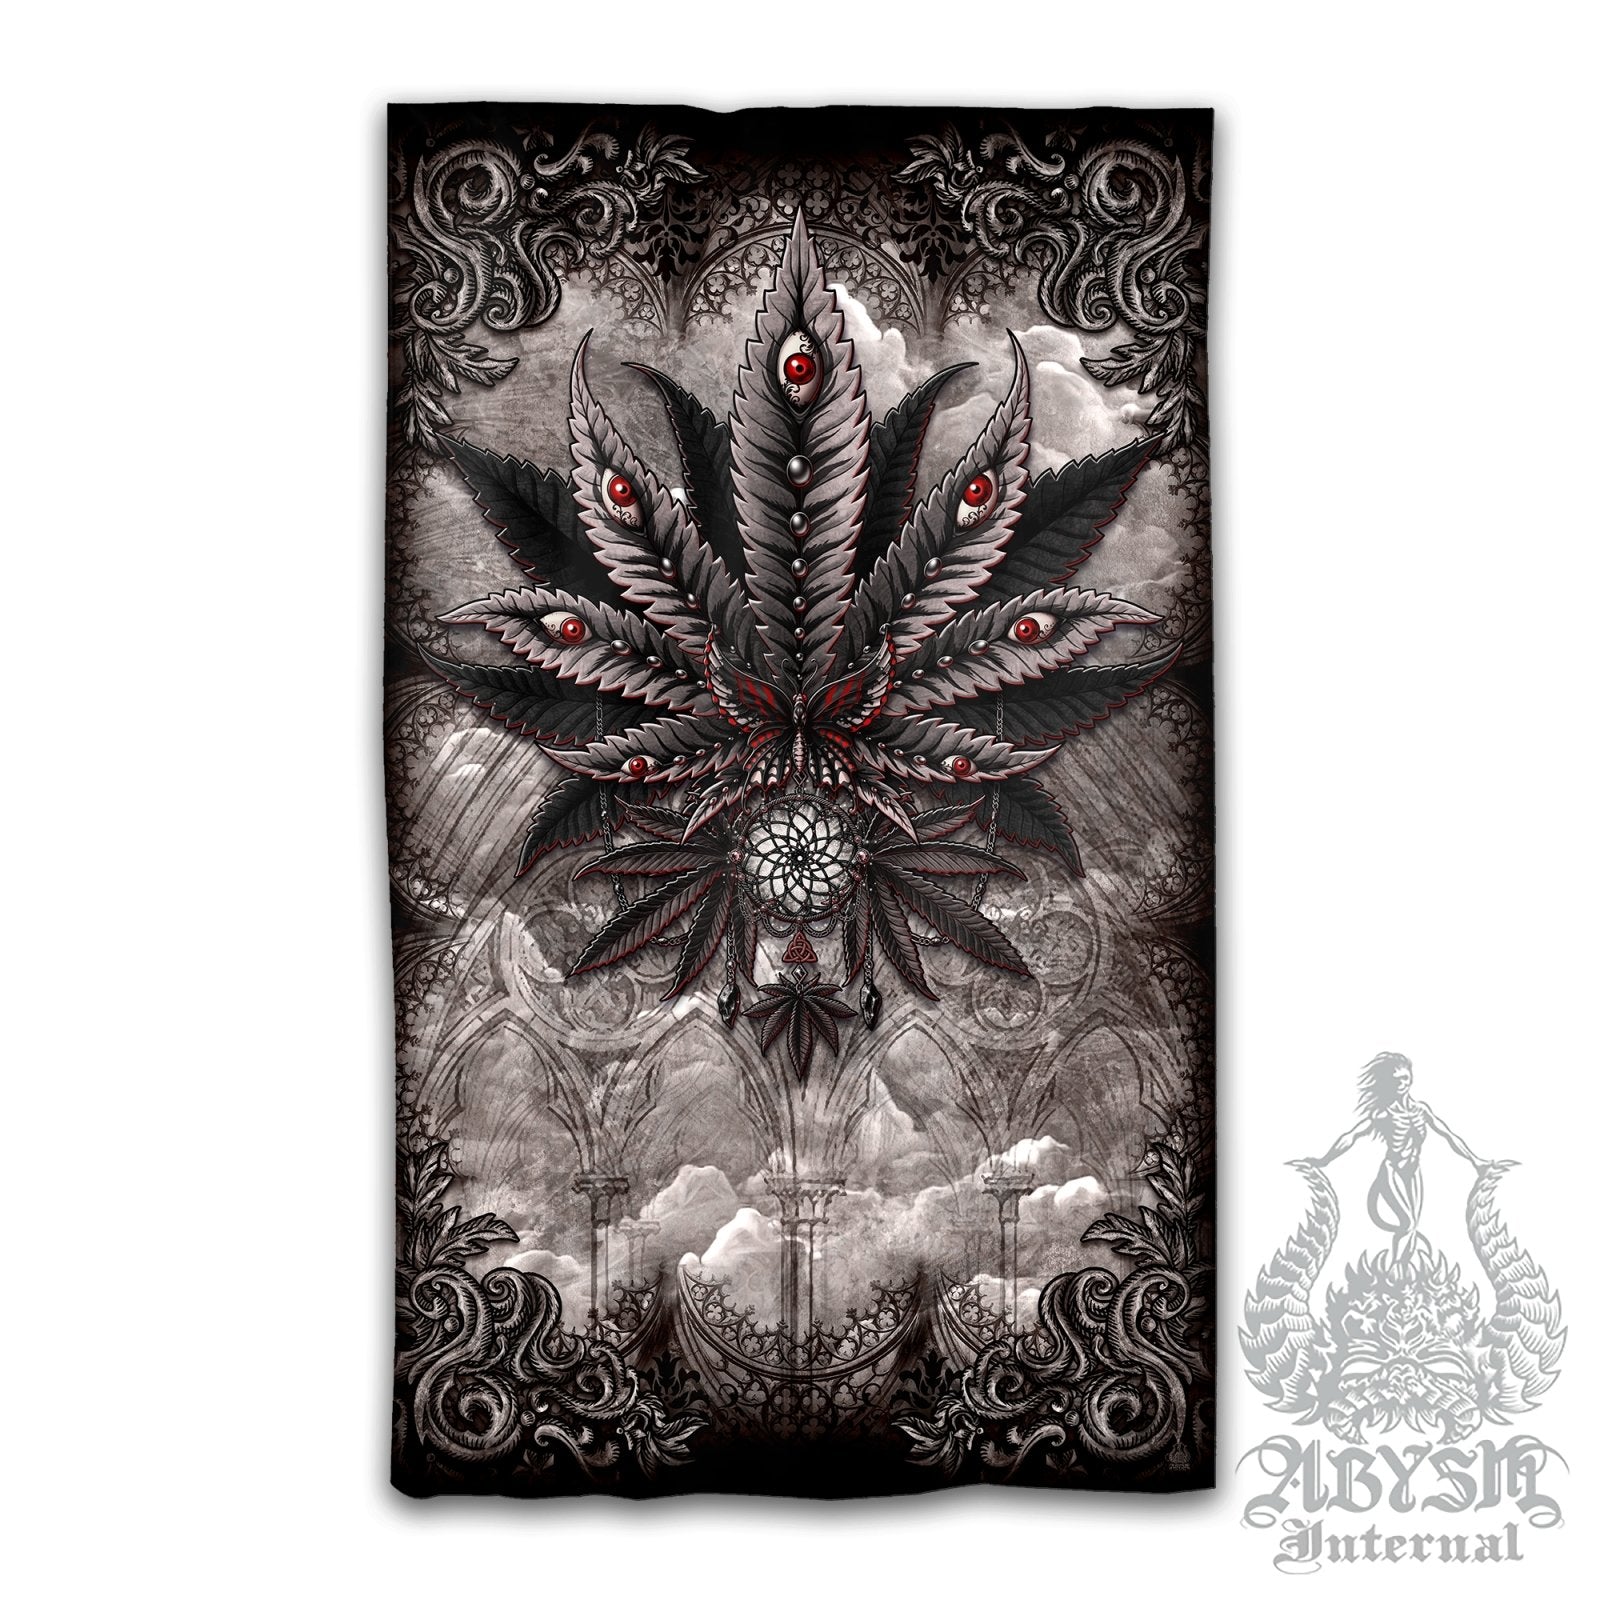 Gothic Weed Blackout Curtains, Cannabis Home and Shop Decor, Long Window Panels, Indie 420 Room Art Print - Horror Grey - Abysm Internal